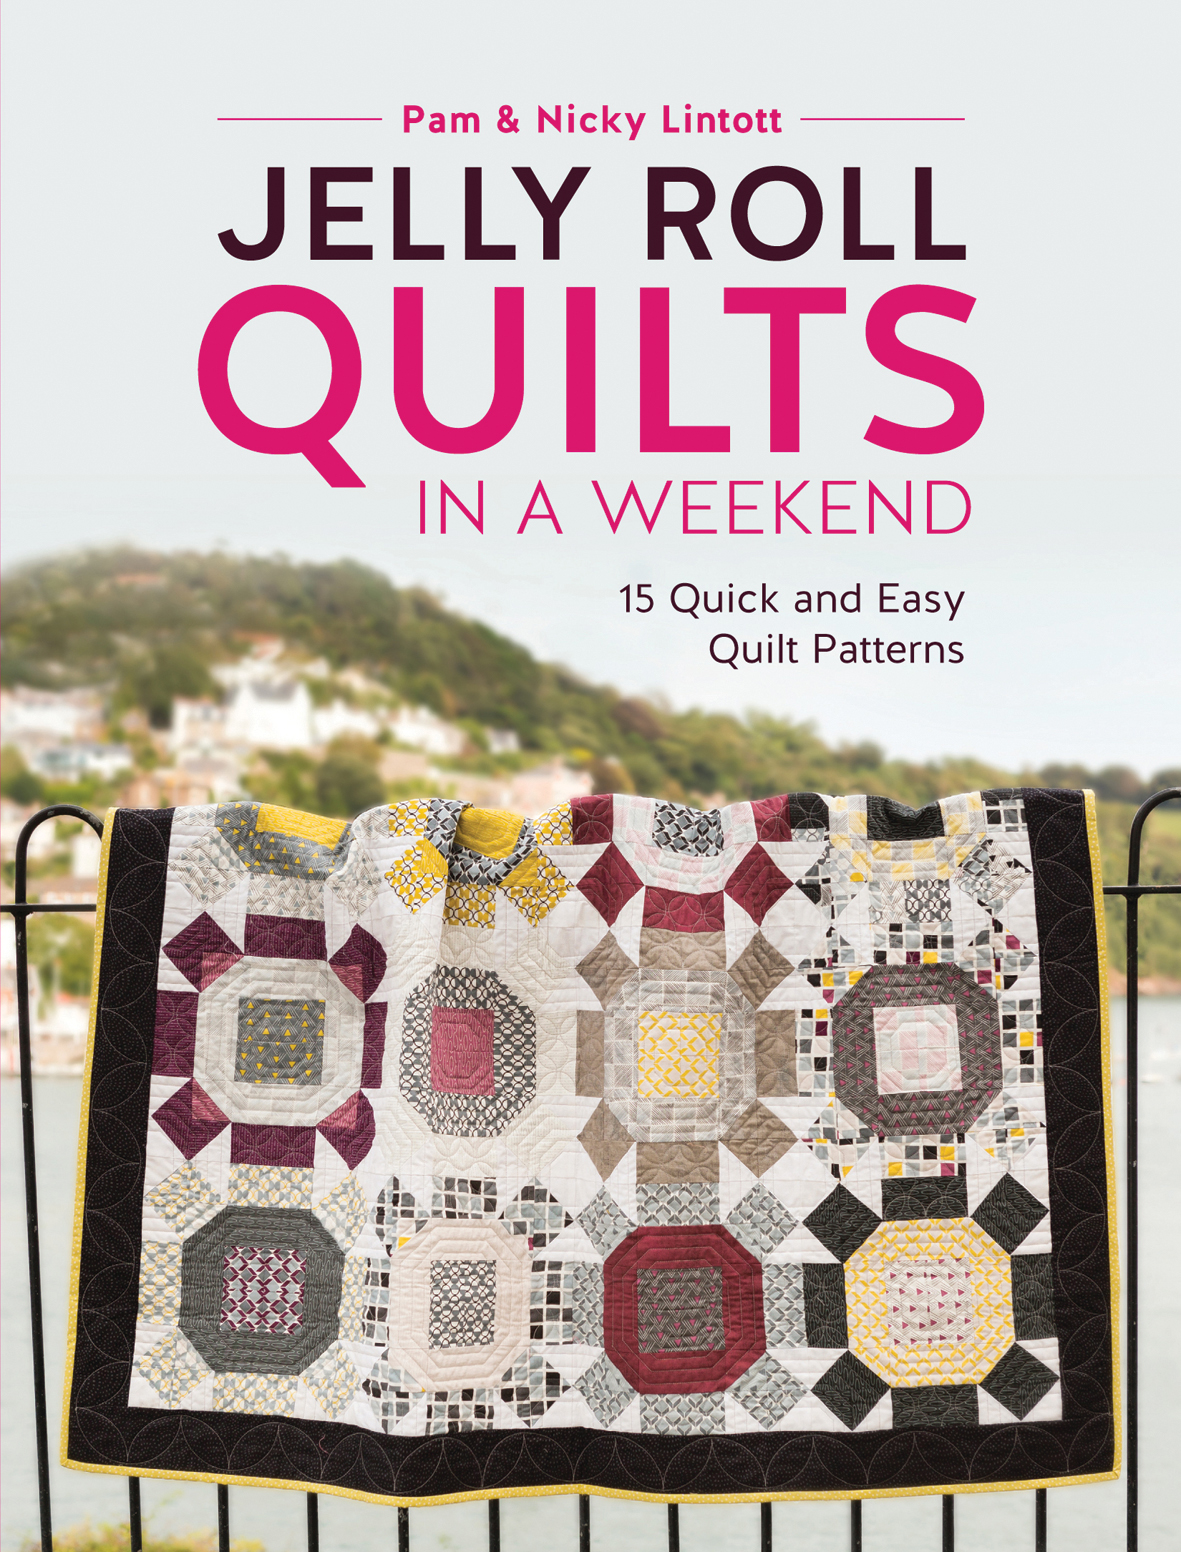 Jelly Roll Quilts in a Weekend - By  Pam Lintott and Nicky Lintott